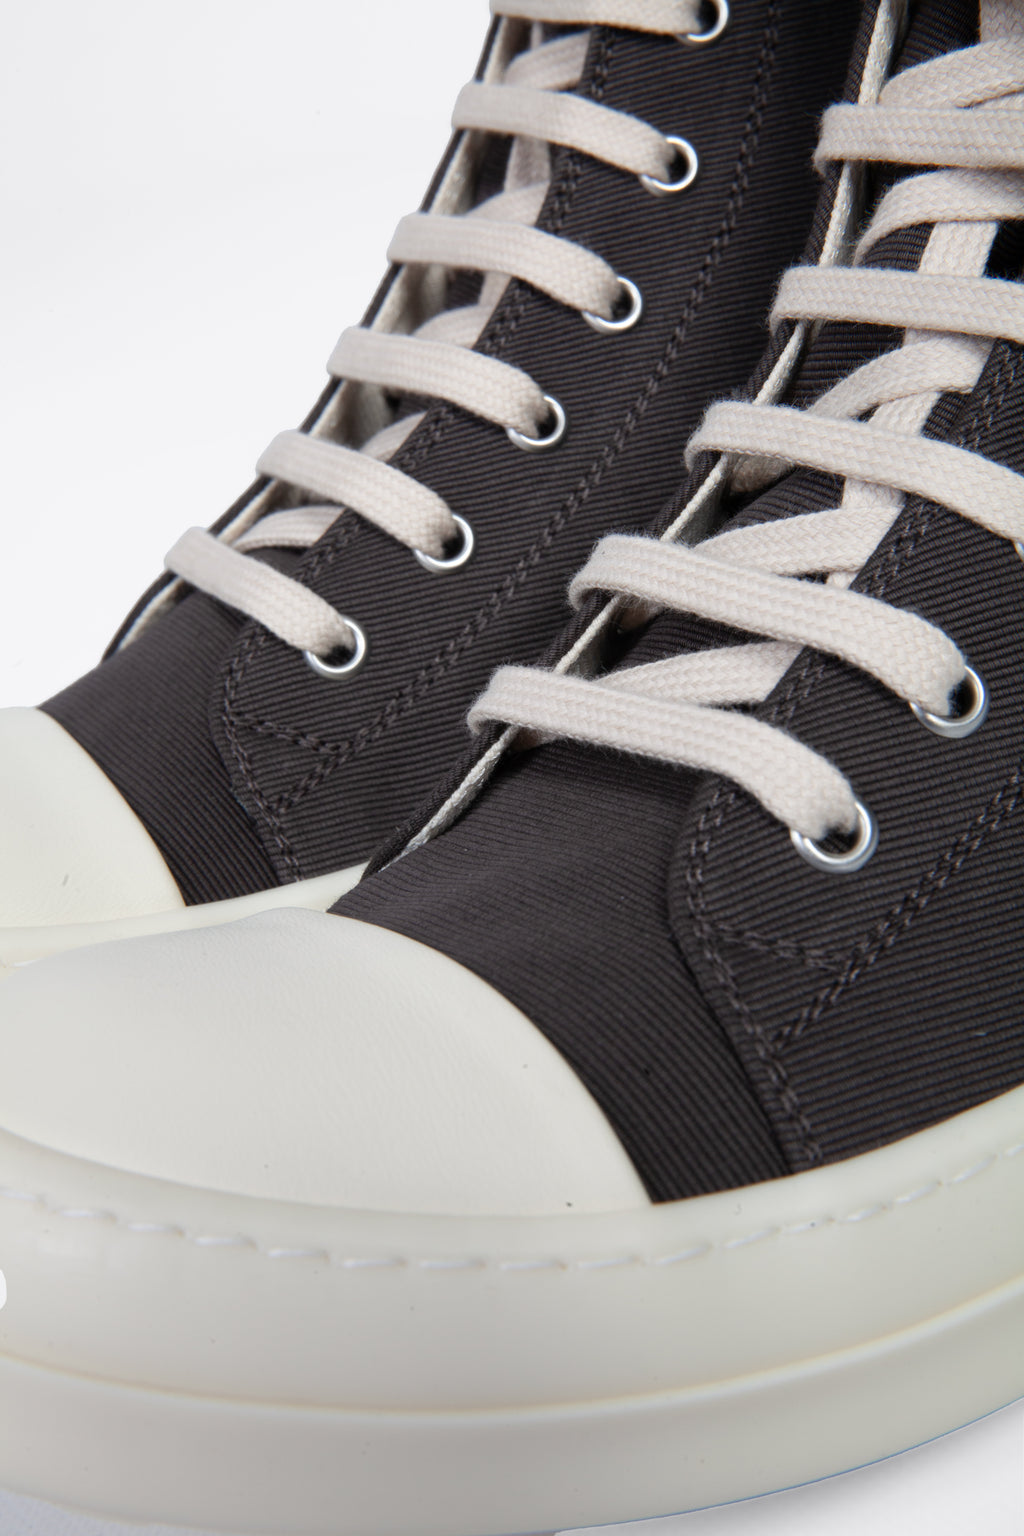 alt-image__Charcoal-grey-cotton-lace-up-high-sneaker-with-eyelets---Hi-sneaks